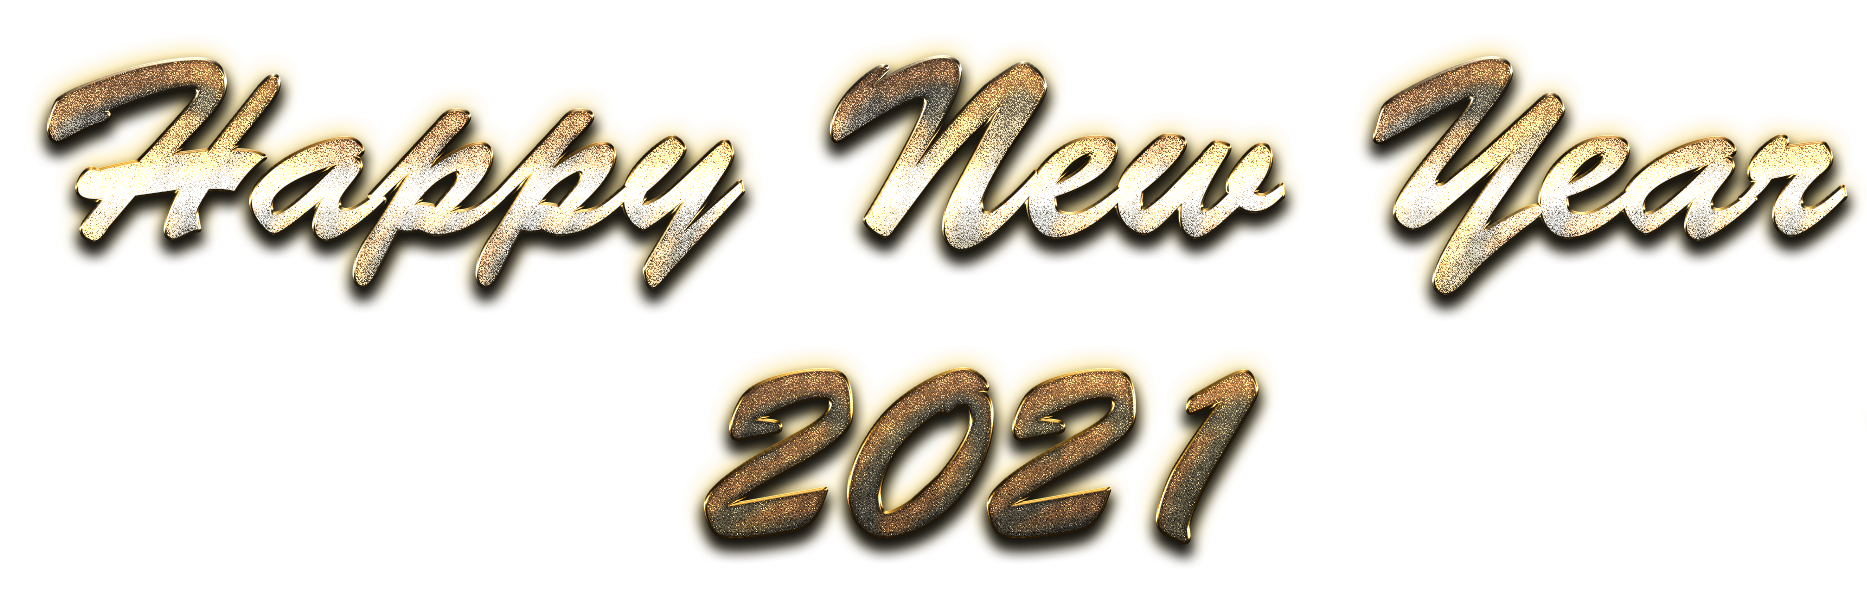 Colors New Year 2021 Happy PNG Image